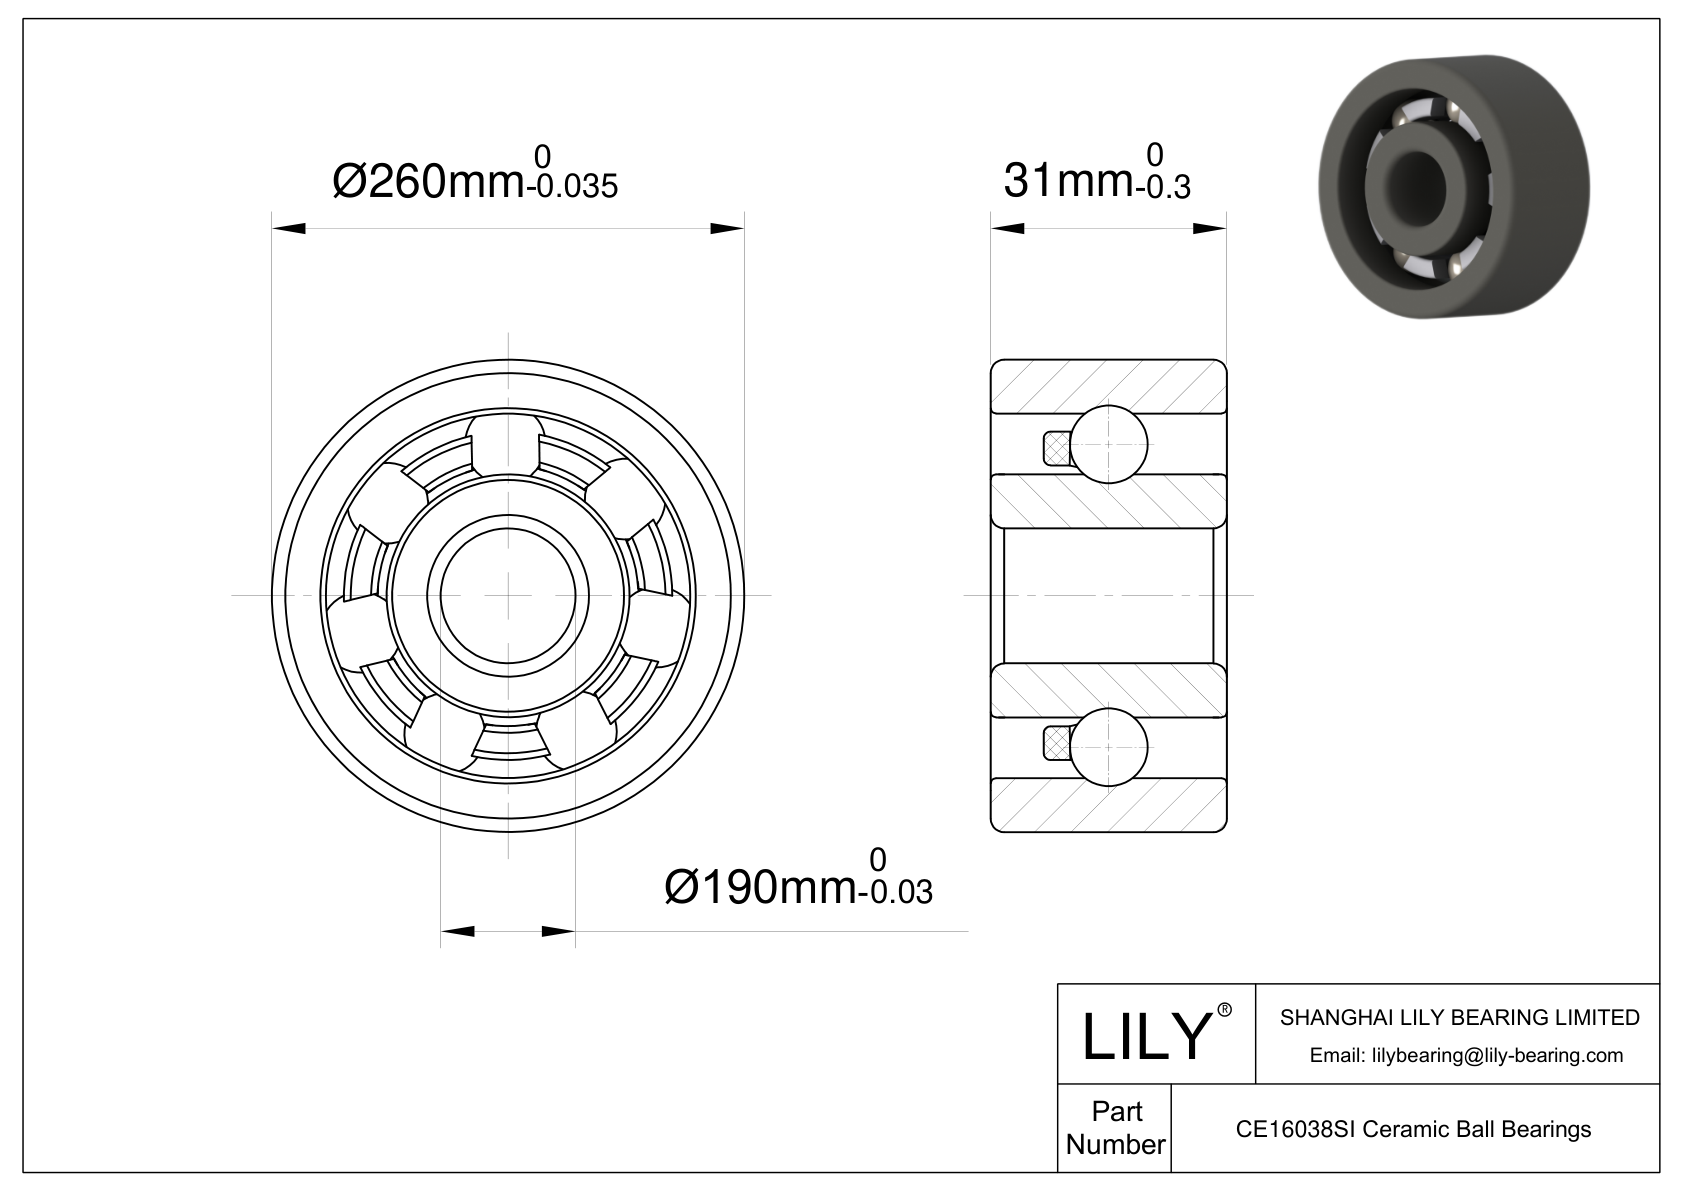 CESI 16038 Metric Size Silicon Nitride Ceramic Bearings cad drawing